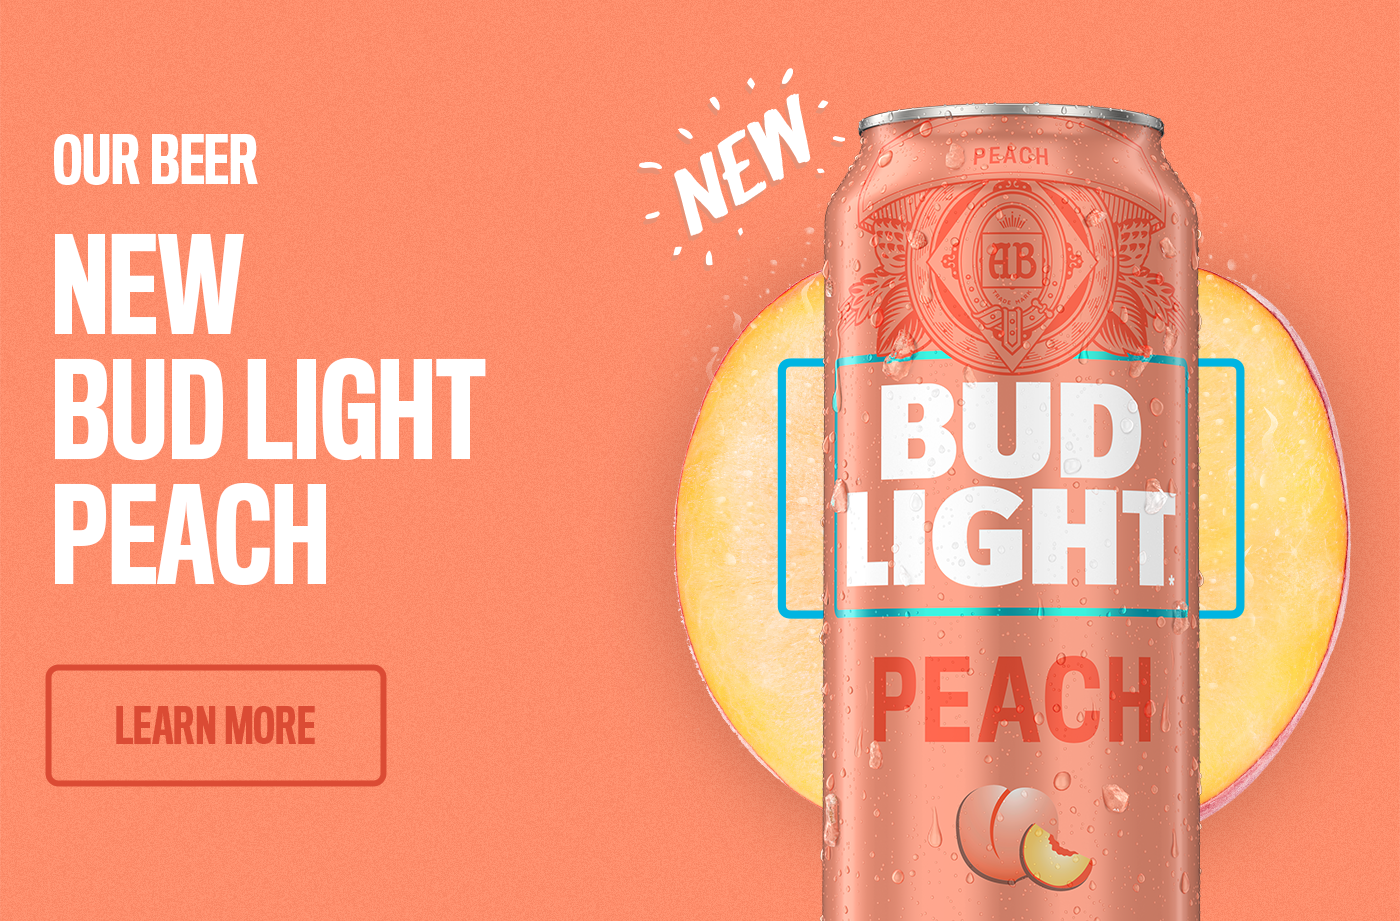 Learn more about our new Bud Light Peach